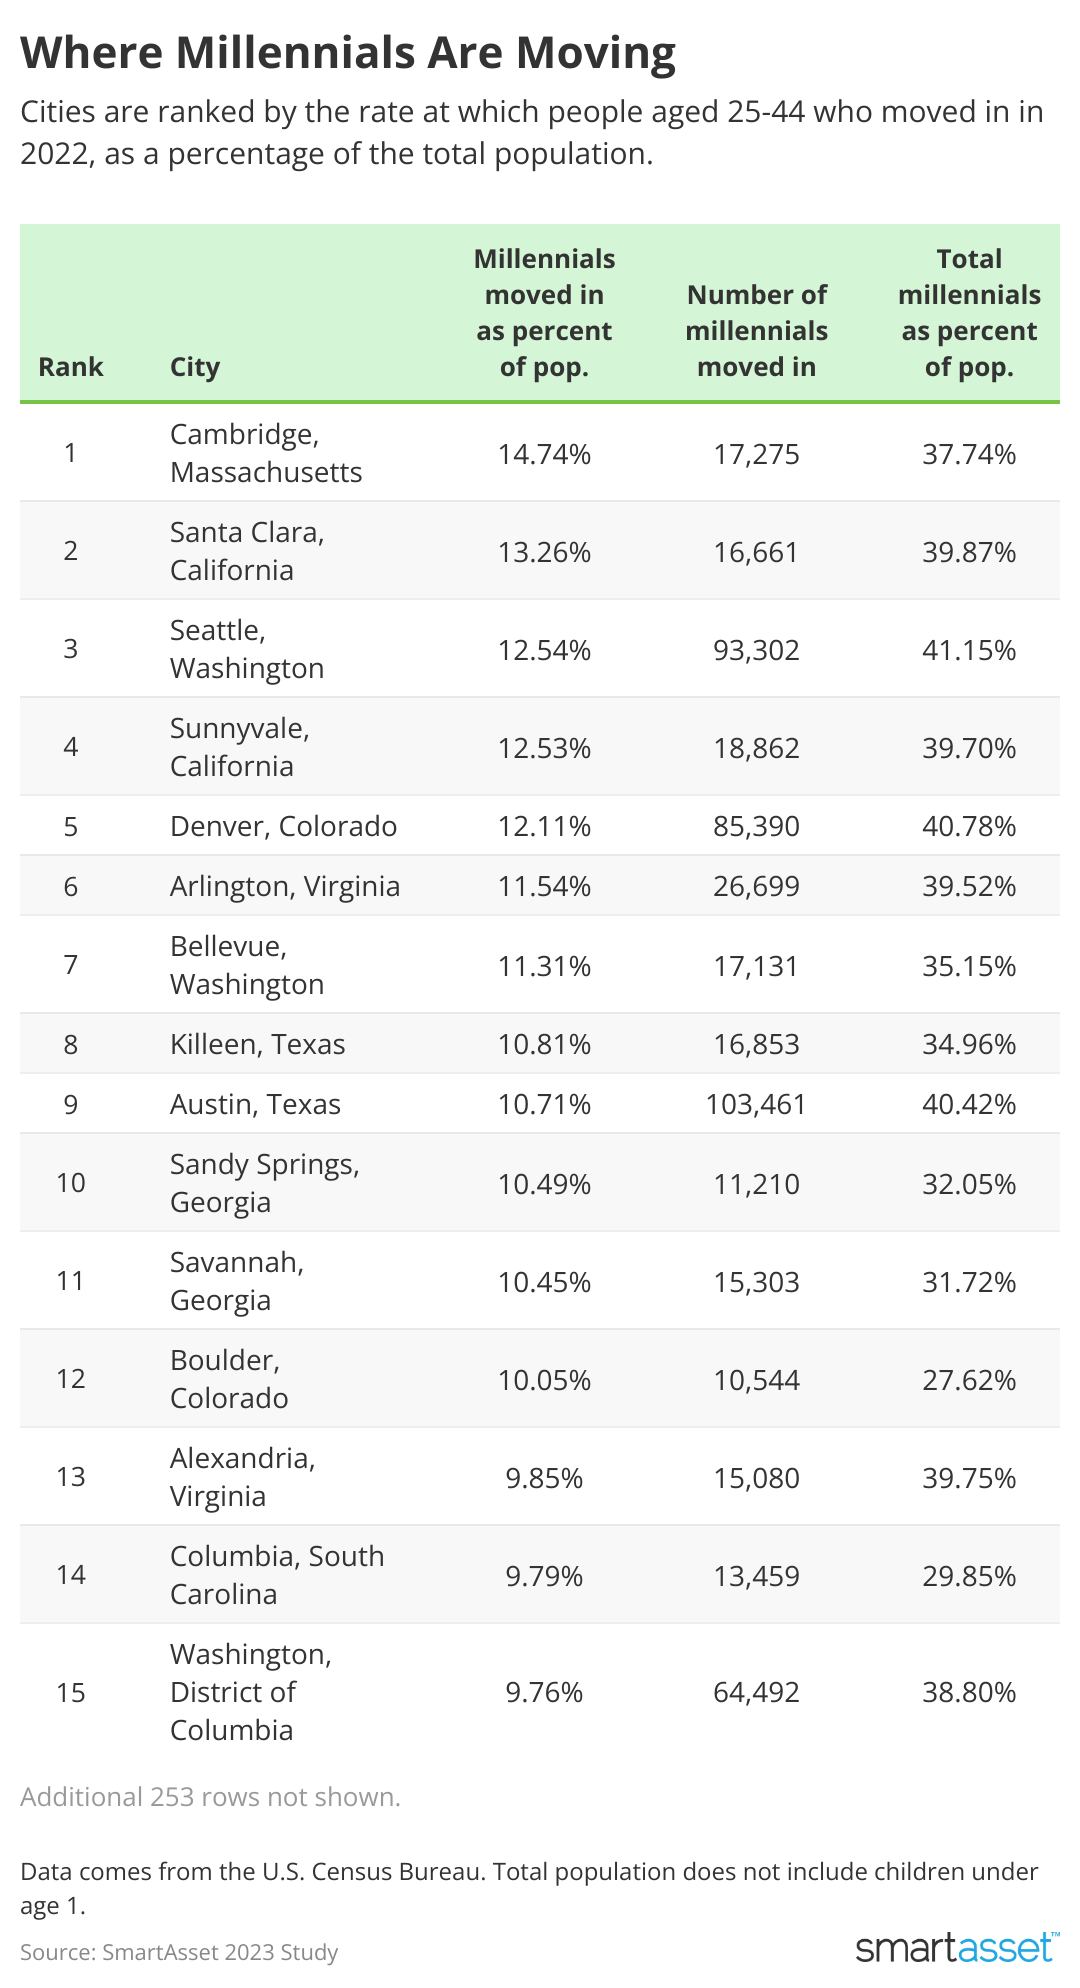 A chart showing Where Millennials Are Moving, with the top 15 Cities ranked by the rate at which people aged 25-44 moved in 2022, as a percentage of the total population.